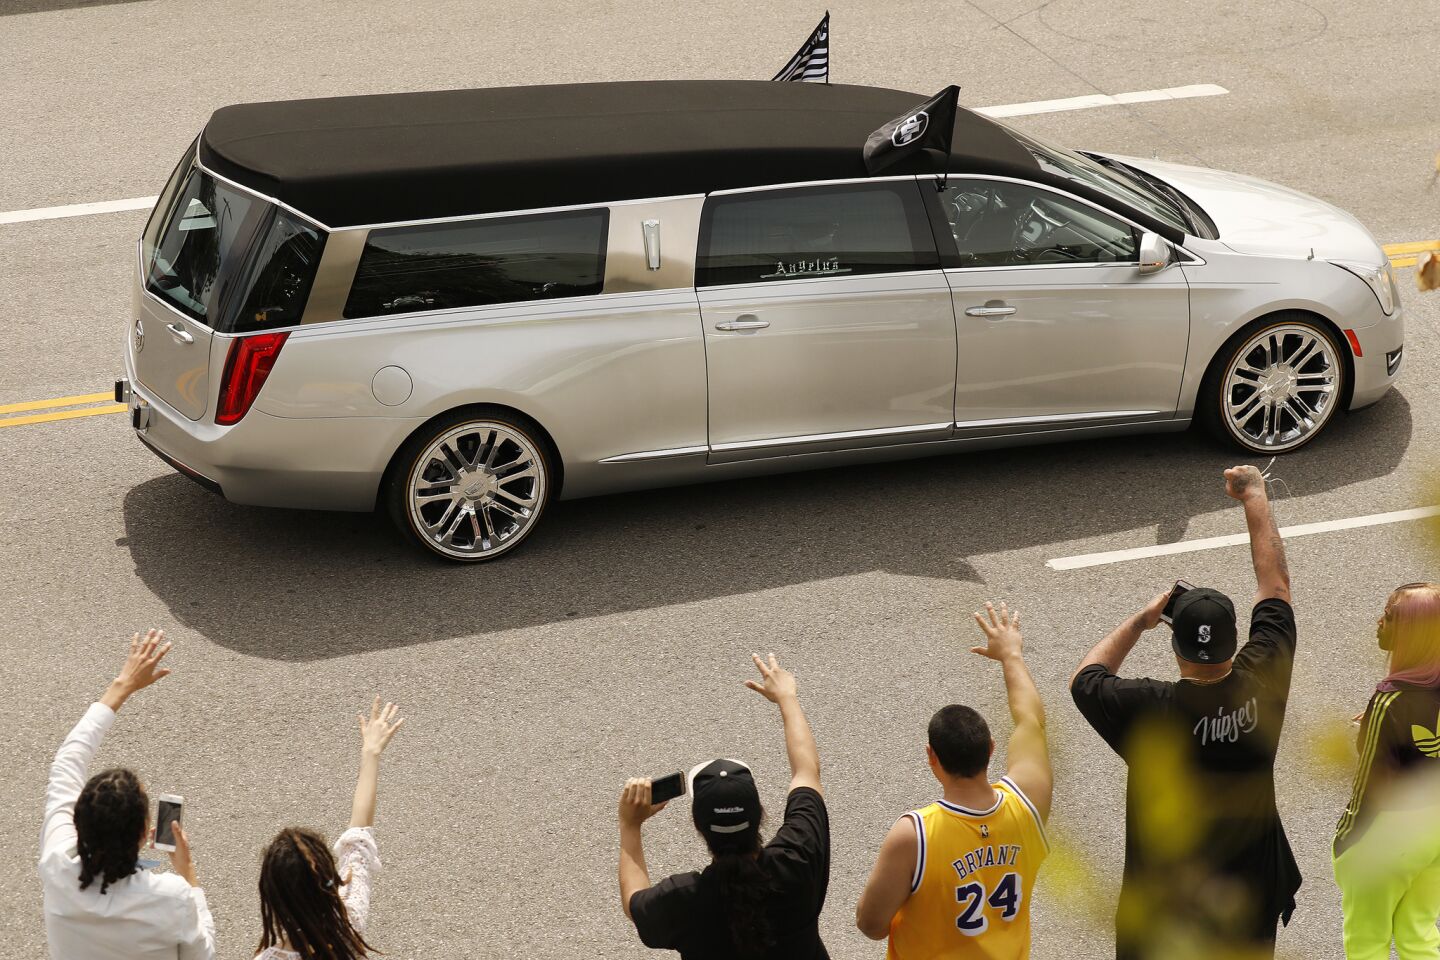 Fans wave as the hearse carrying Nipsey Hussle's body departs Staples Center in a procession after the rapper's memorial.